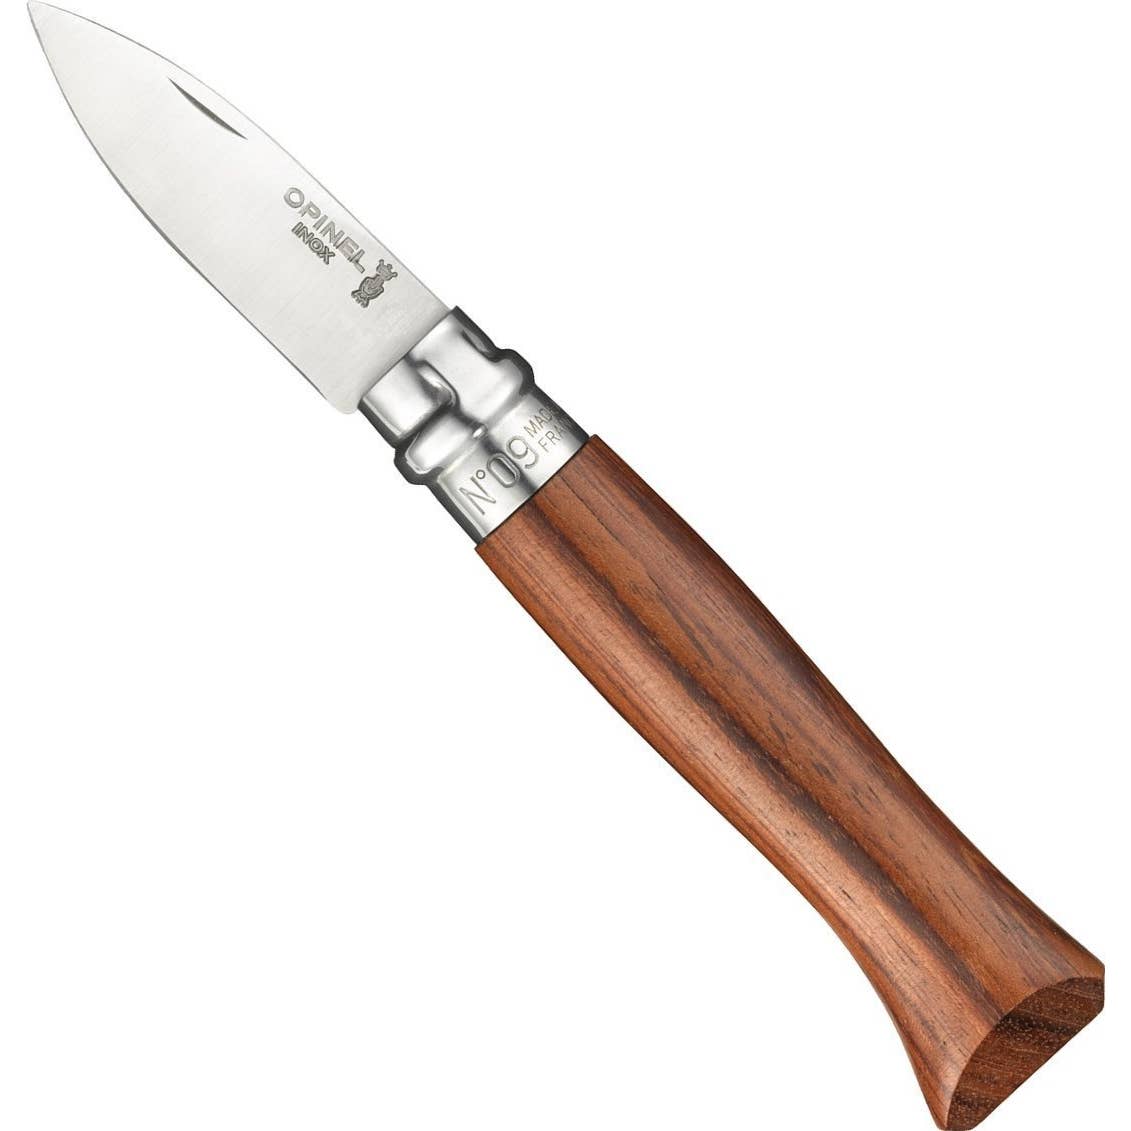 Opinel Paring Knives No112 (Box of 2) - OPINEL USA